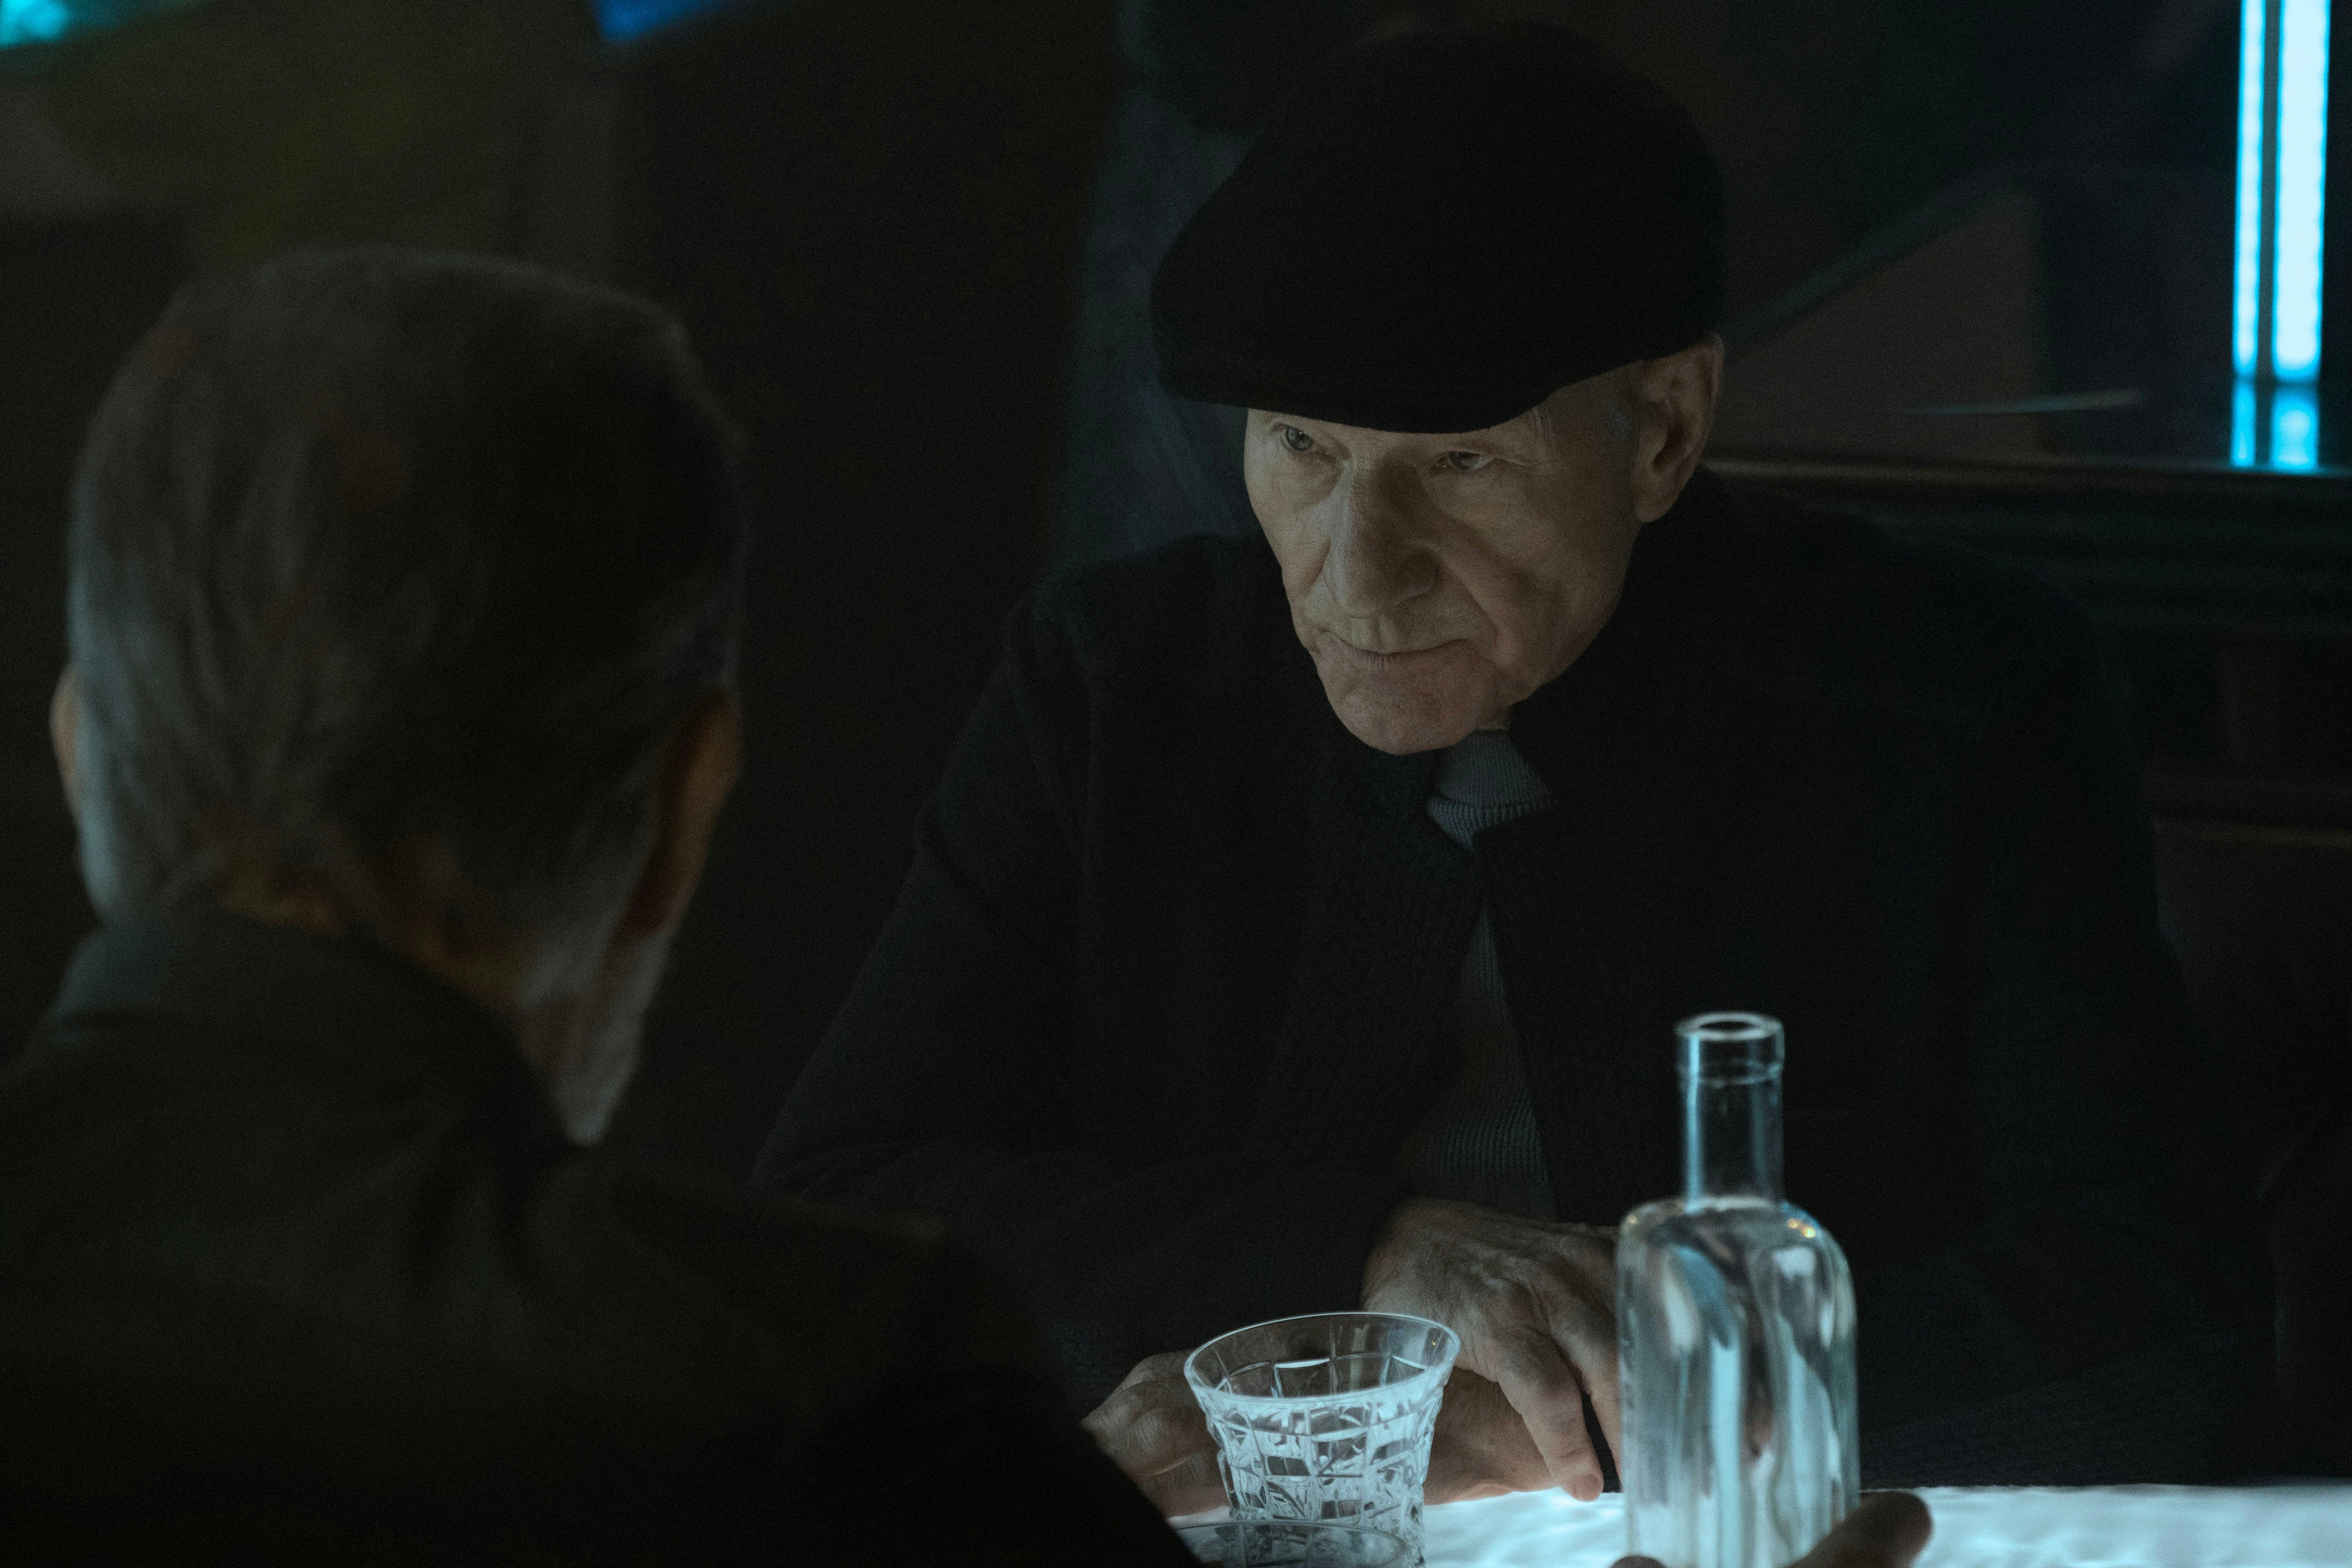 Star Trek: Picard 'The Next Generation' - Picard sits across from Riker at a bar